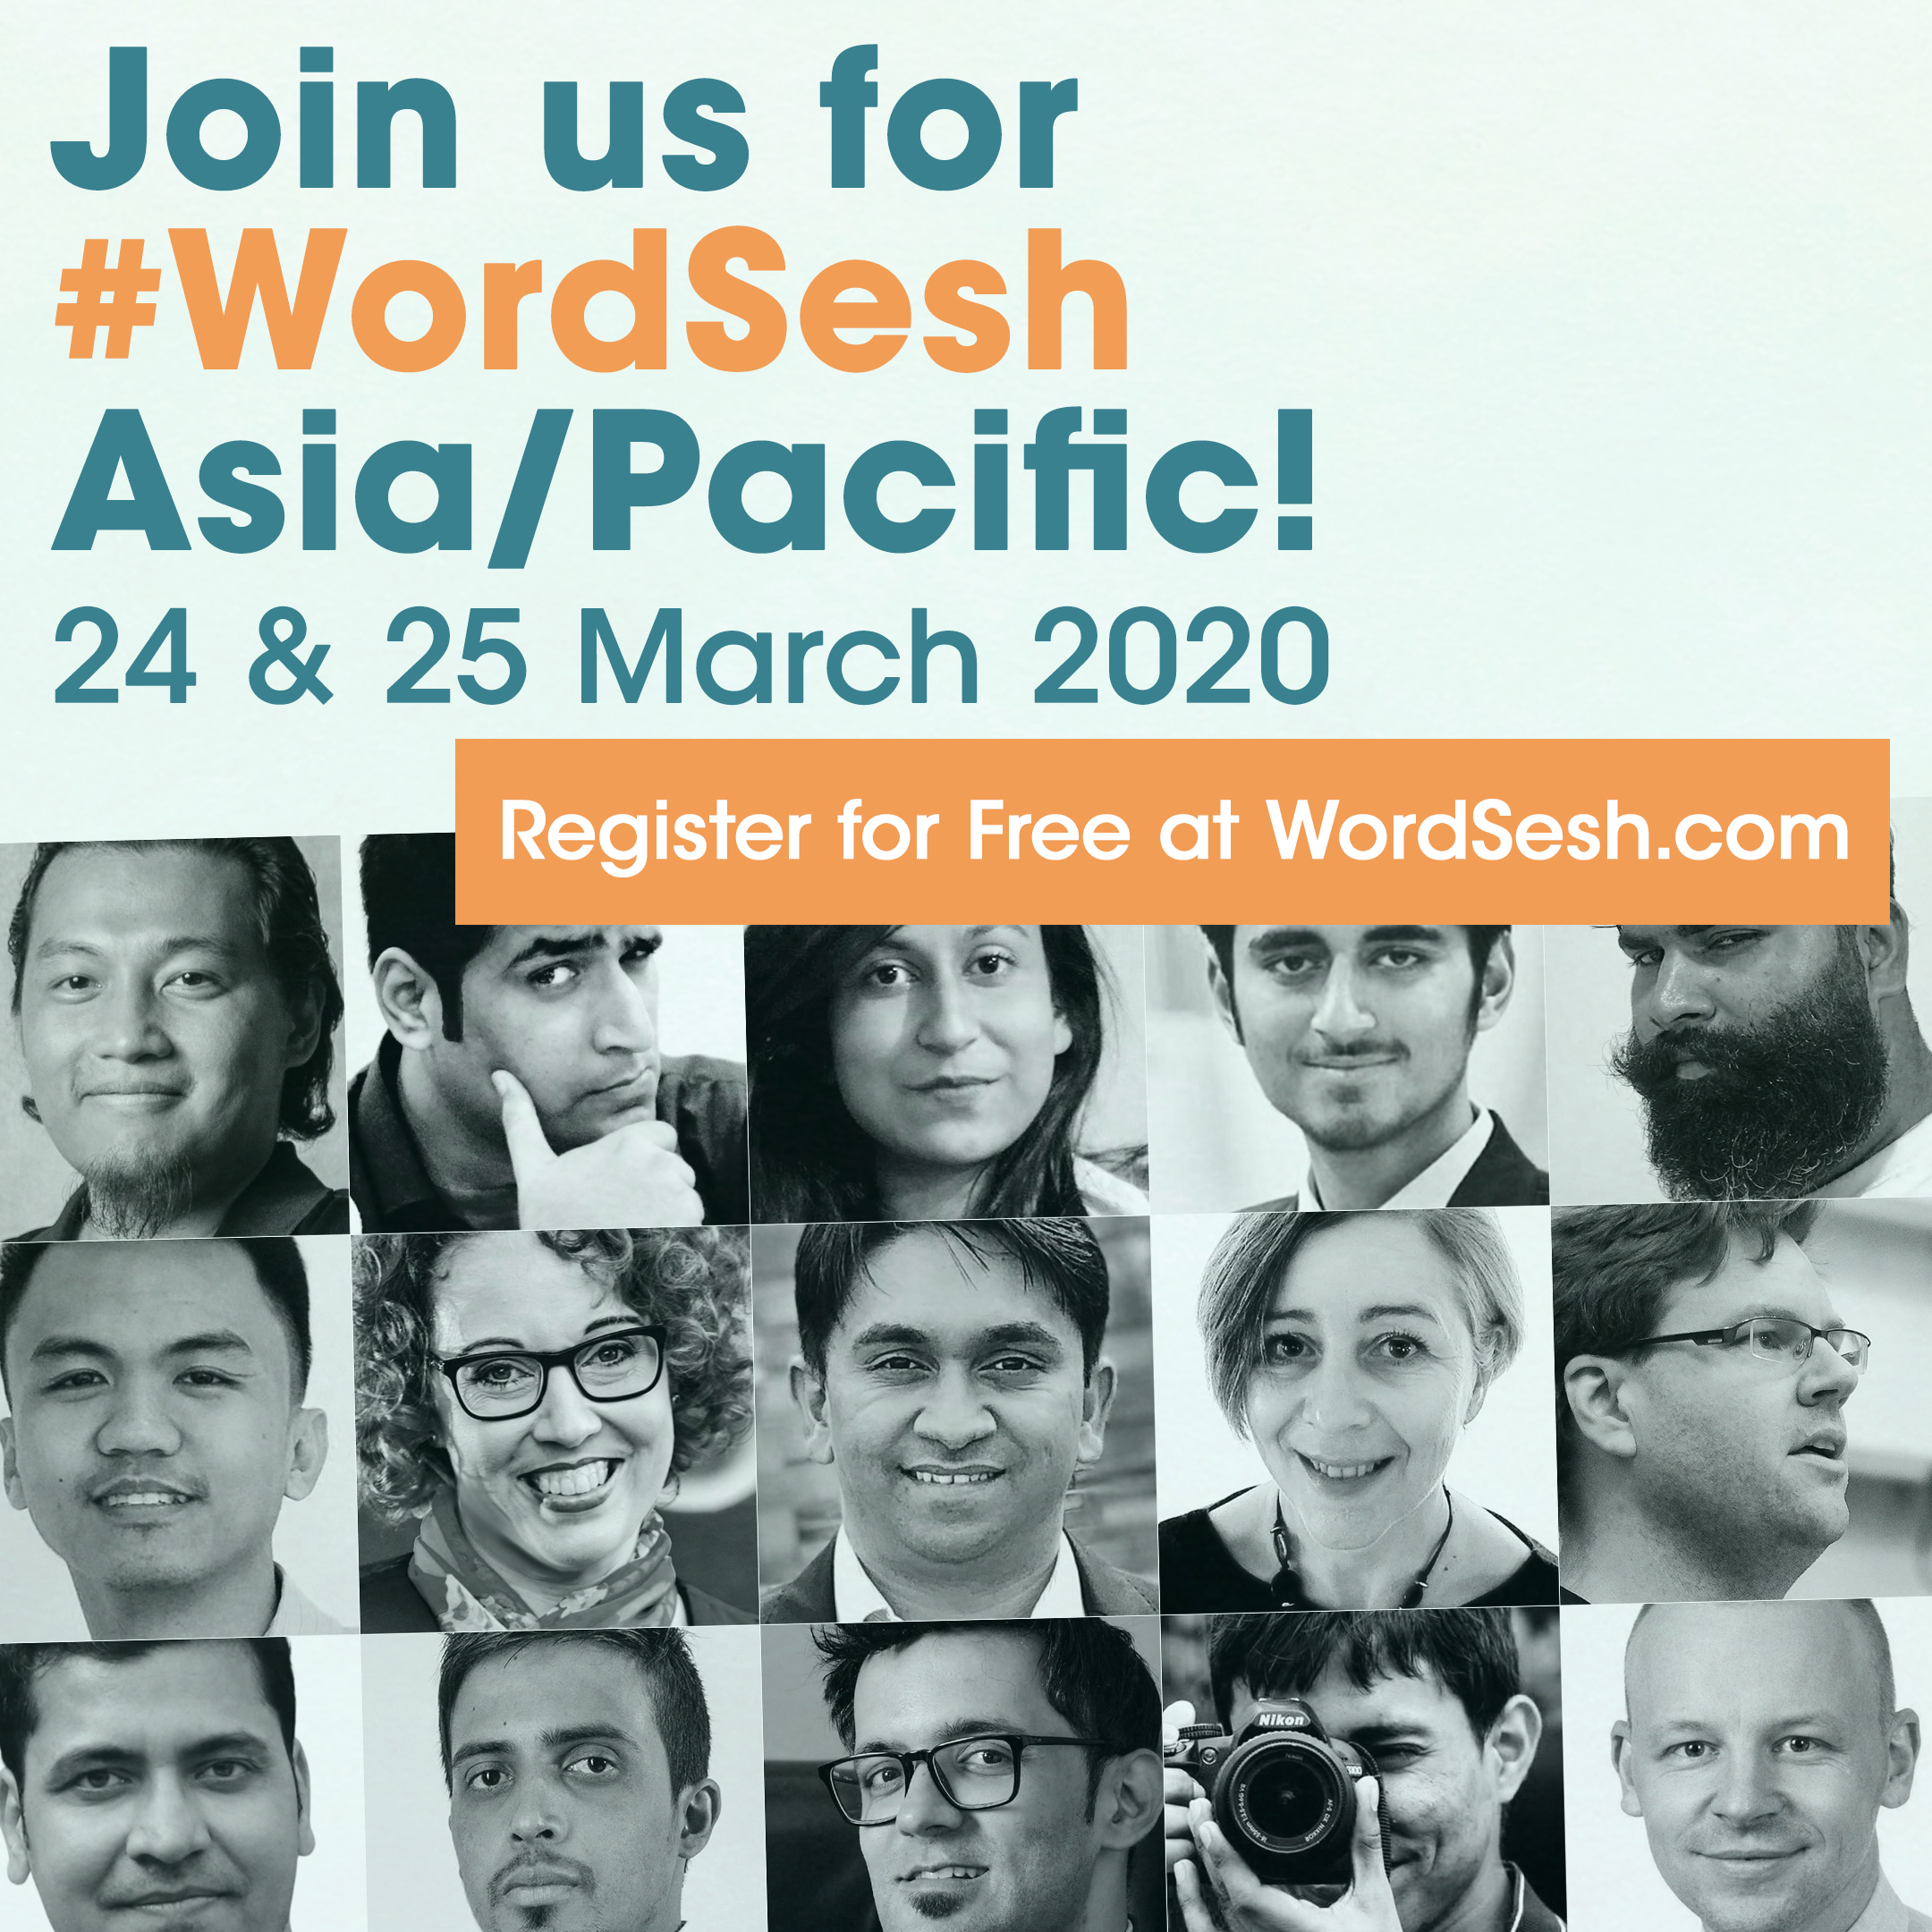 Square banner with text "Join us for #WordSesh Asia/Pacific! 24 & 25 March 2020. Register for free at WordSesh.com"